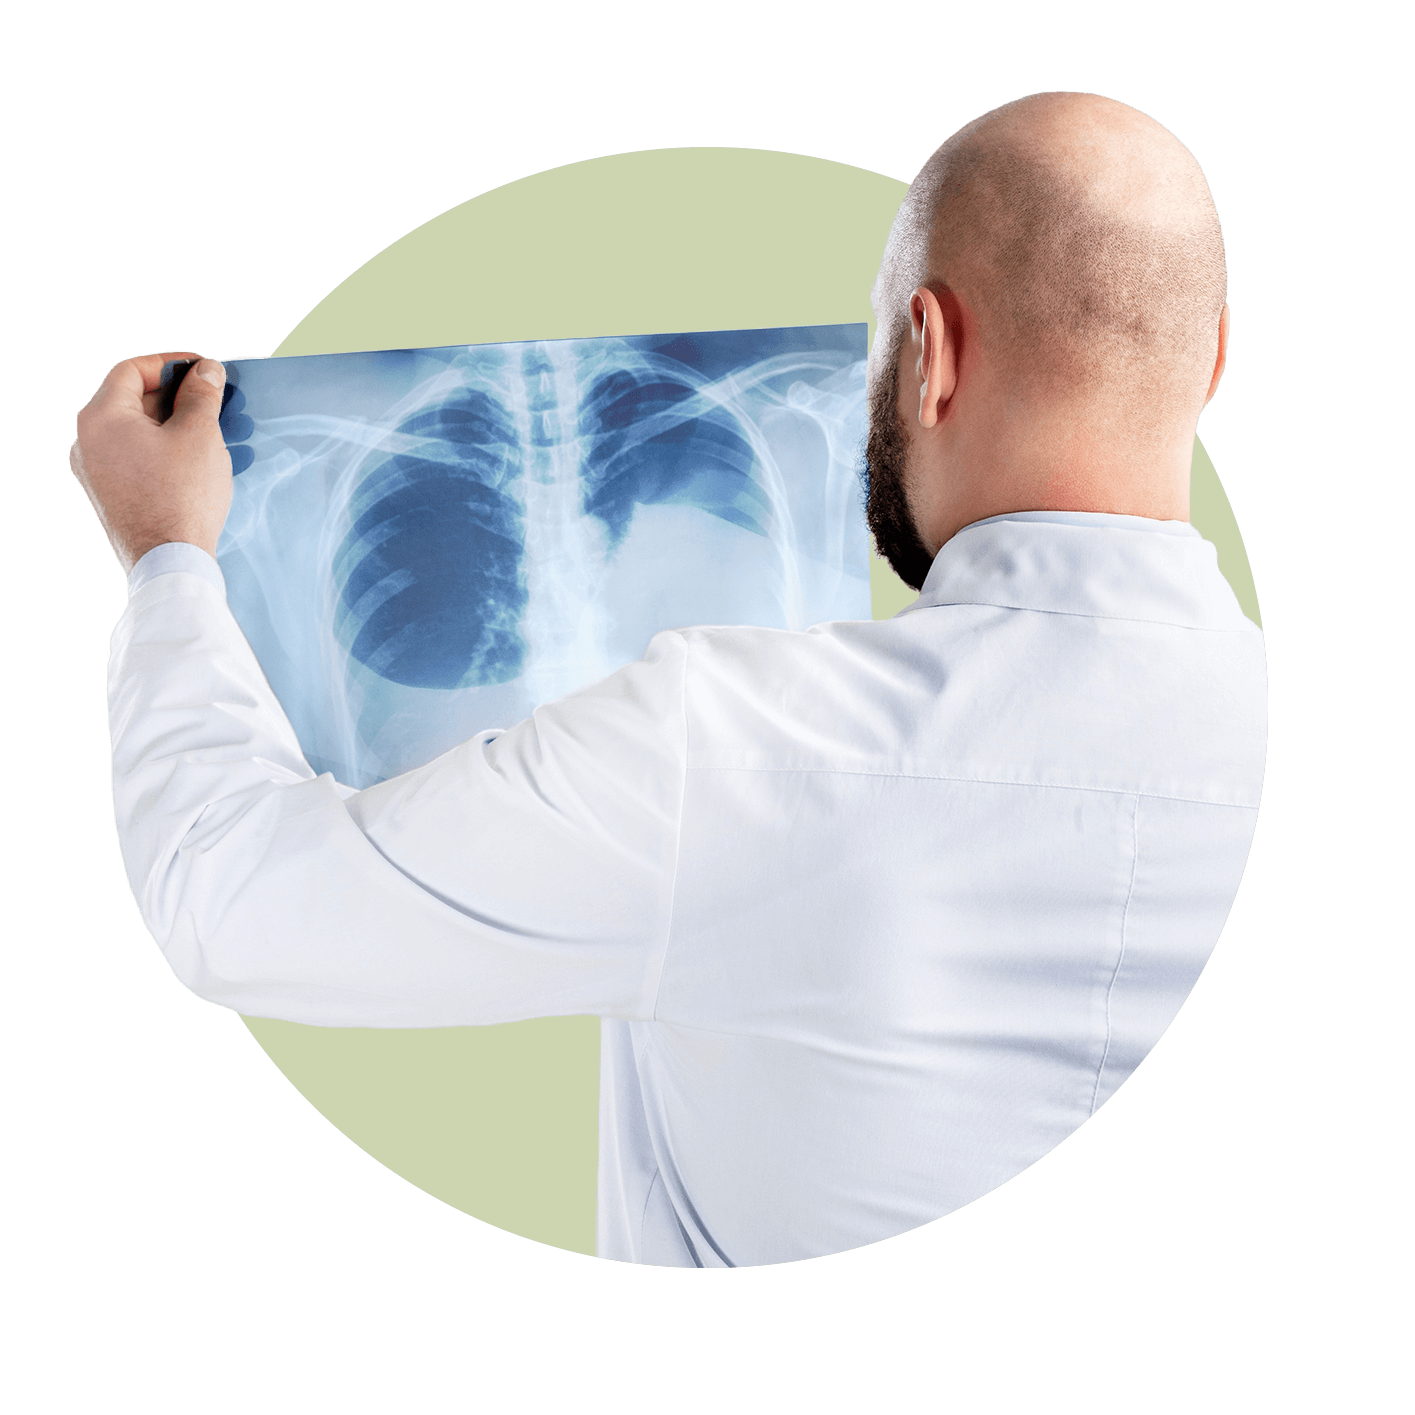 Man with beard with back facing camera looking at a chest X-ray